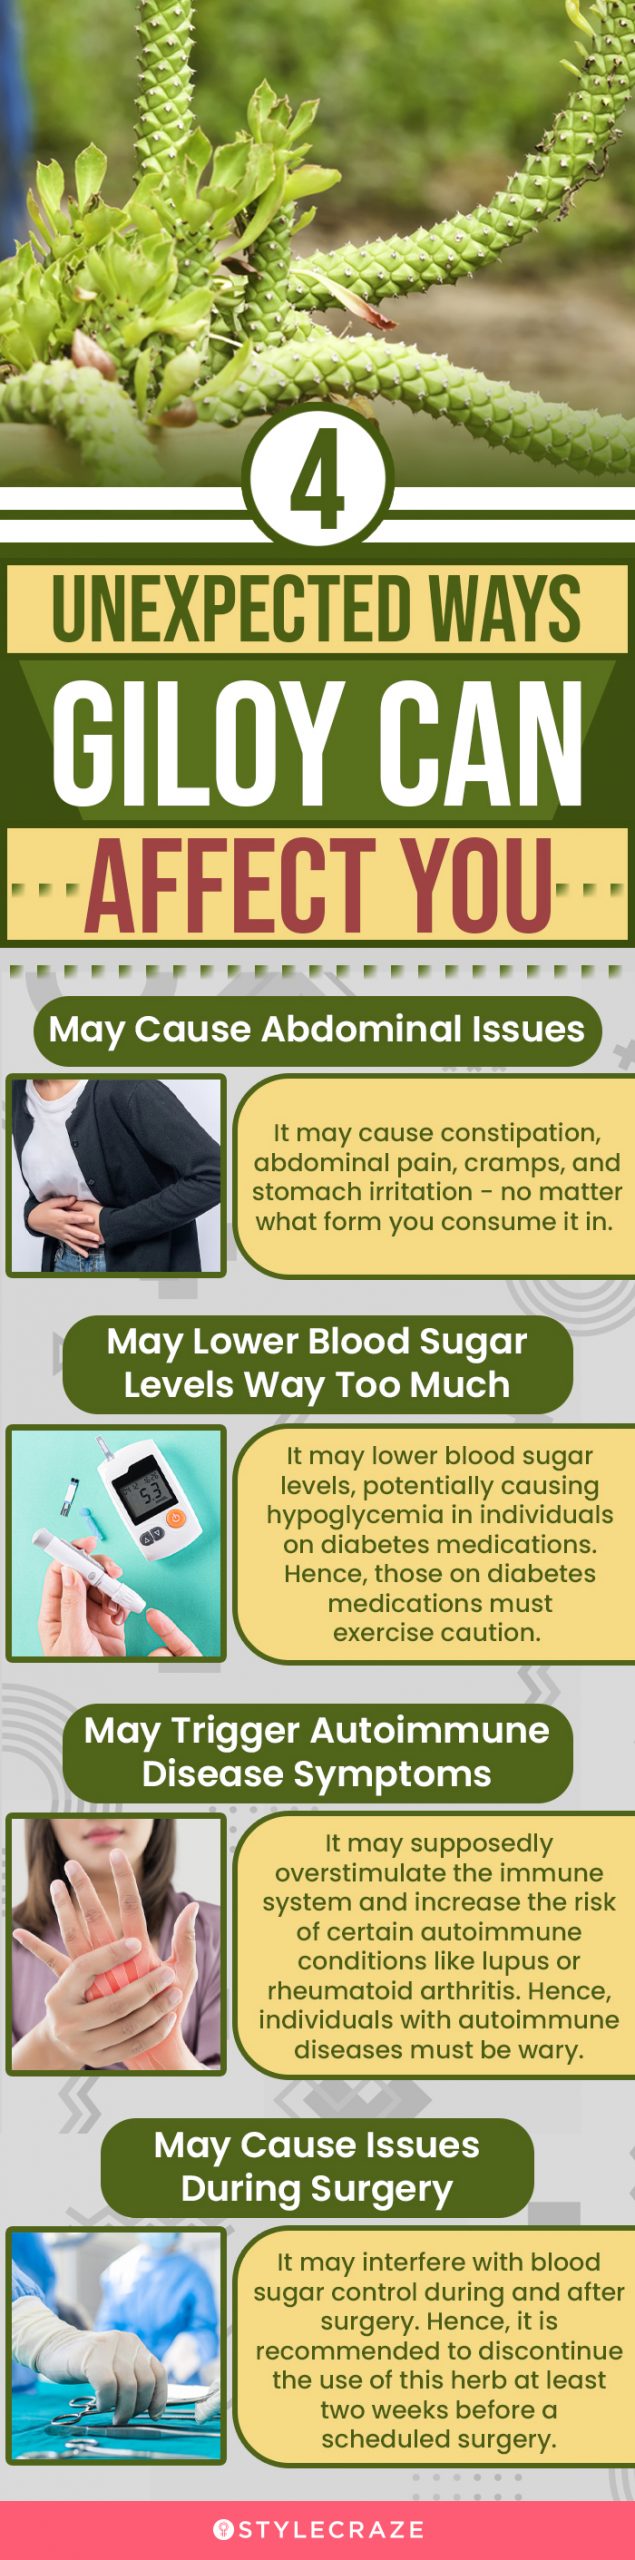 4 unexpected side effects of giloy (infographic)